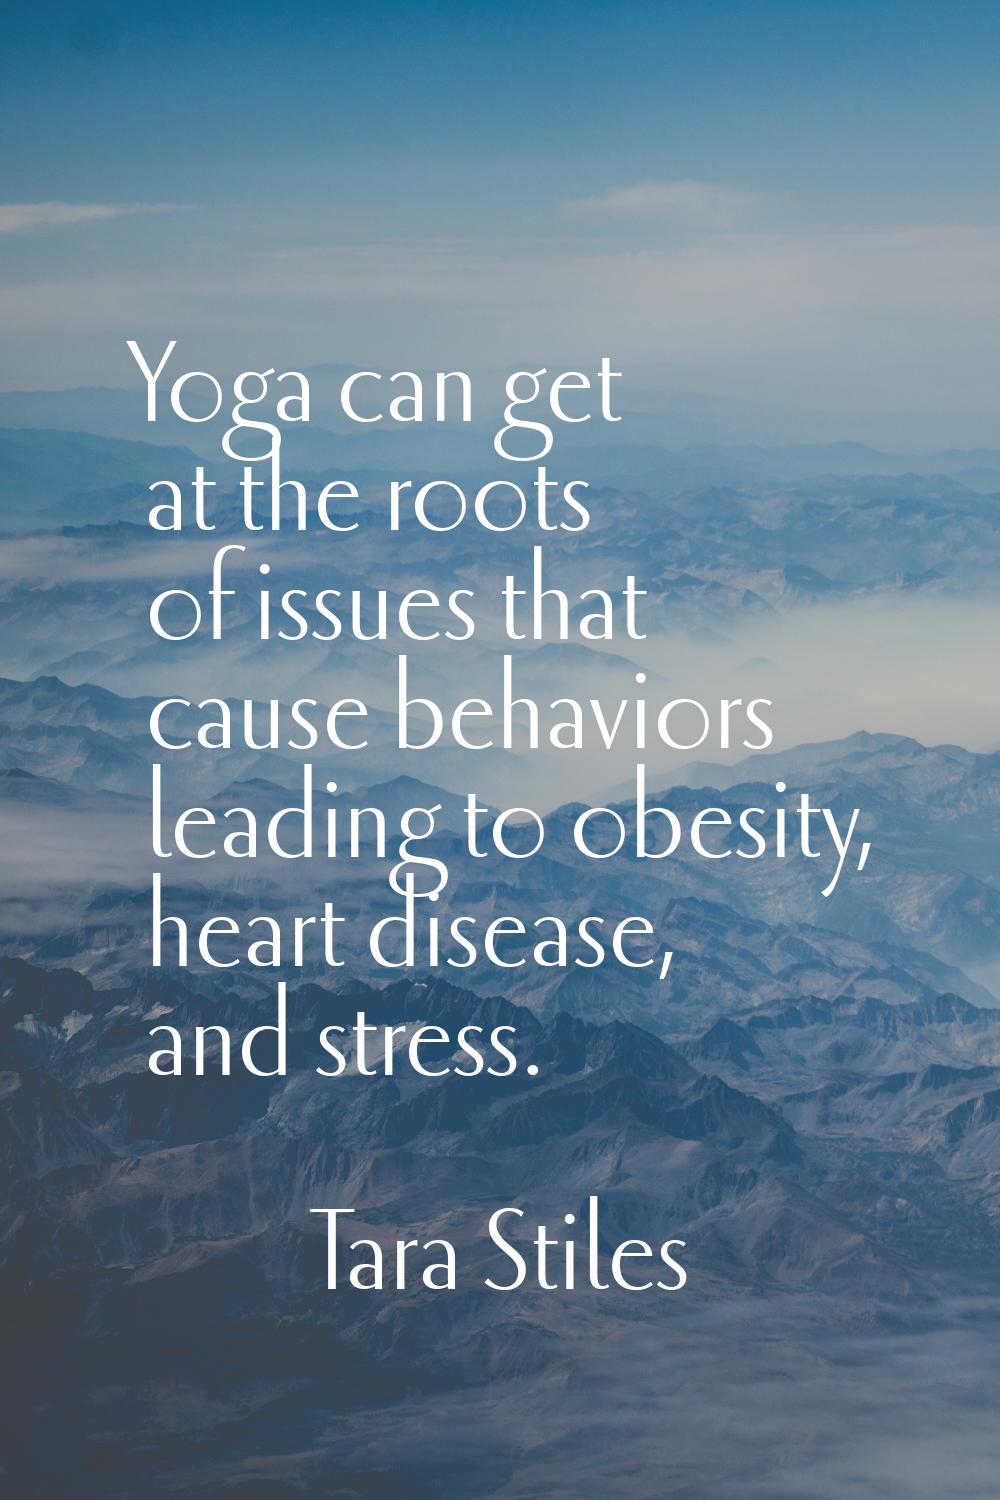 Yoga can get at the roots of issues that cause behaviors leading to obesity, heart disease, and str